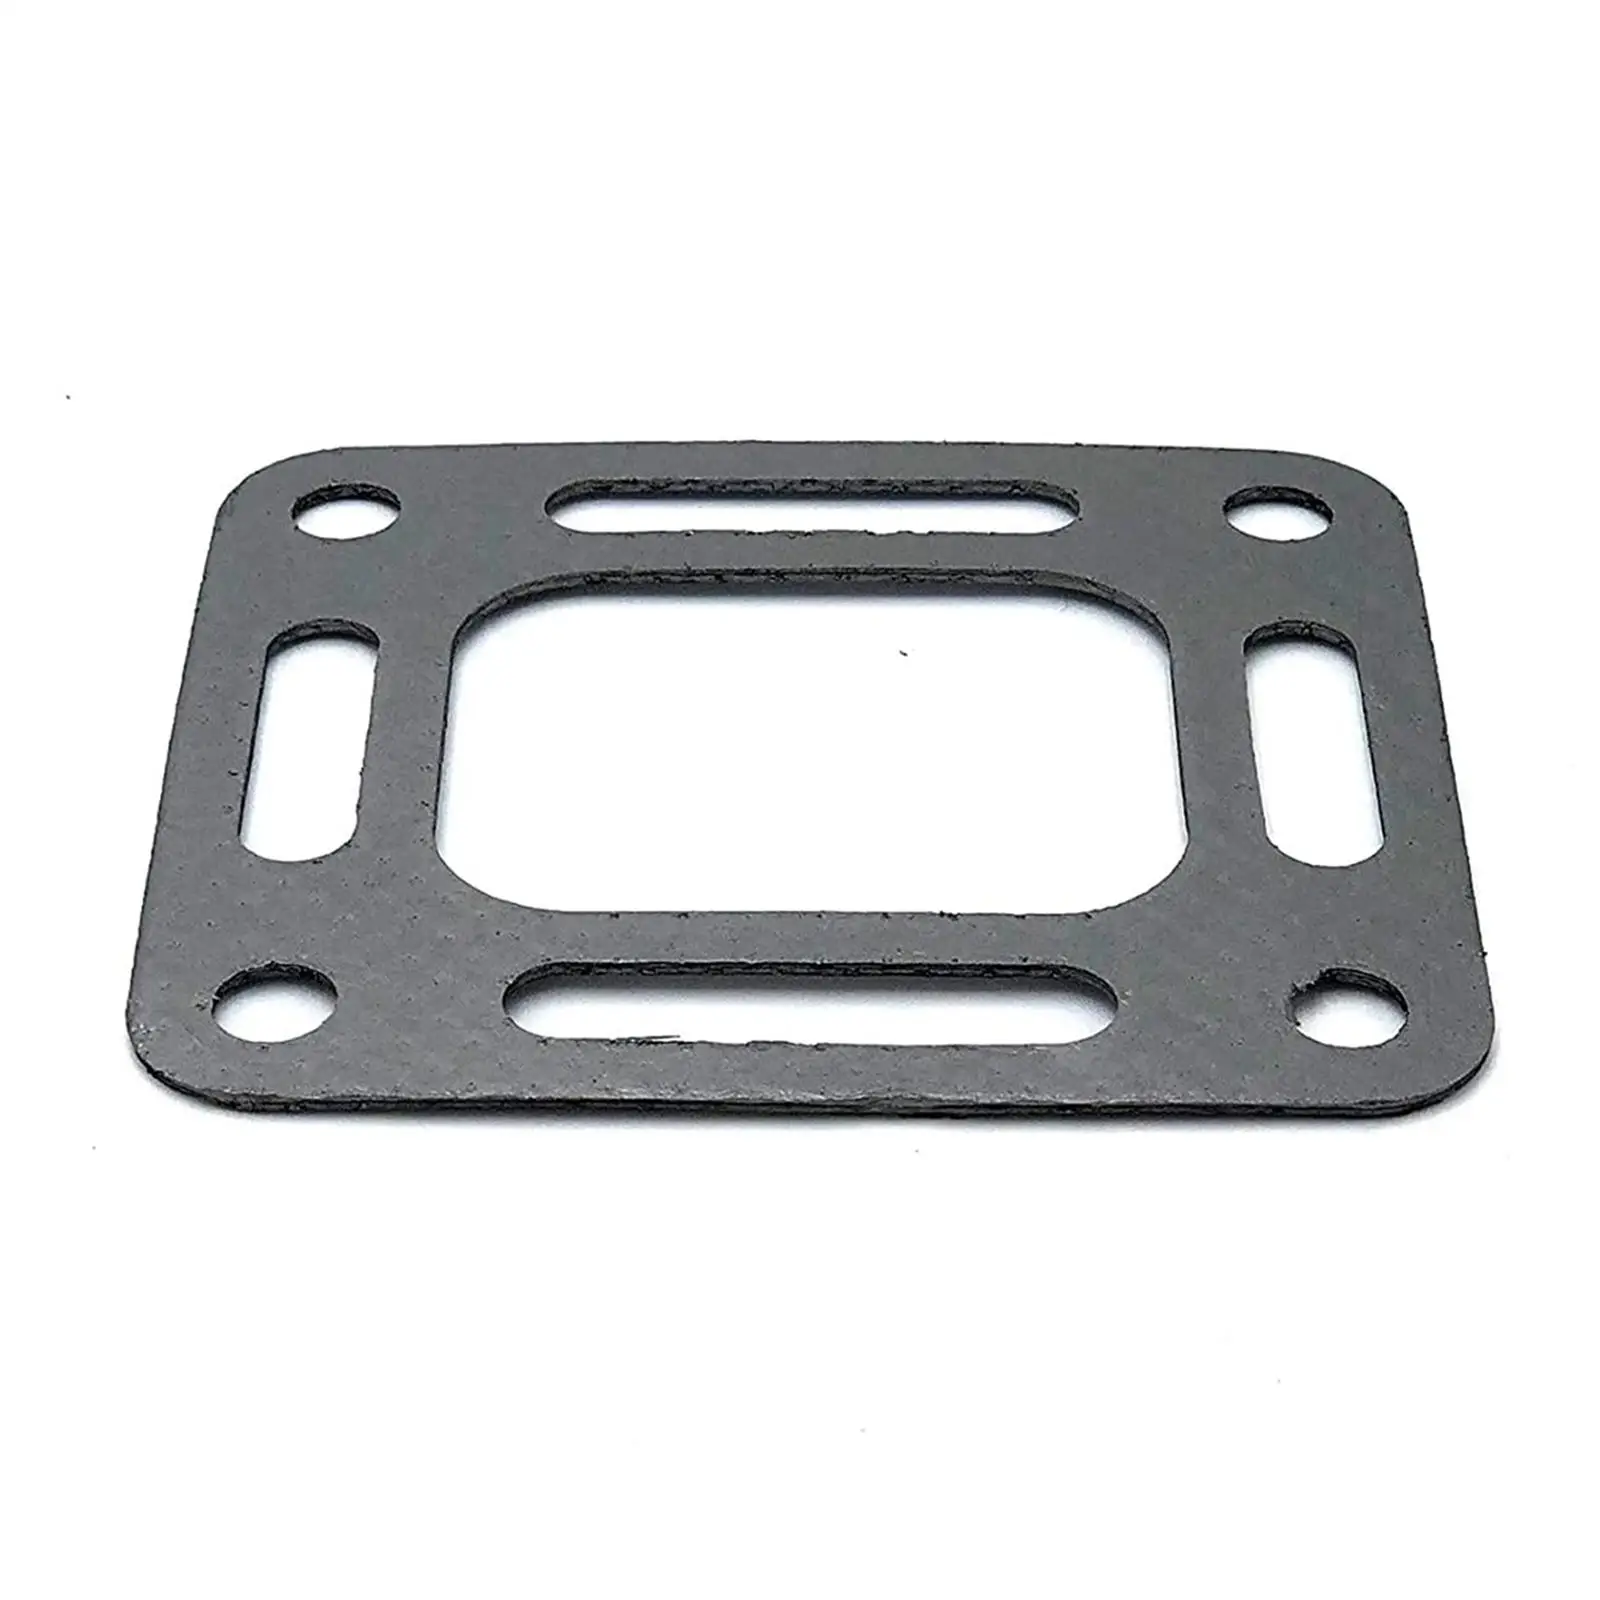 18-2849-1 High Performance Replaces Durable Spare Parts Exhaust Elbow Gasket 27-818832 27-863726 for Mercury Outboard Motor